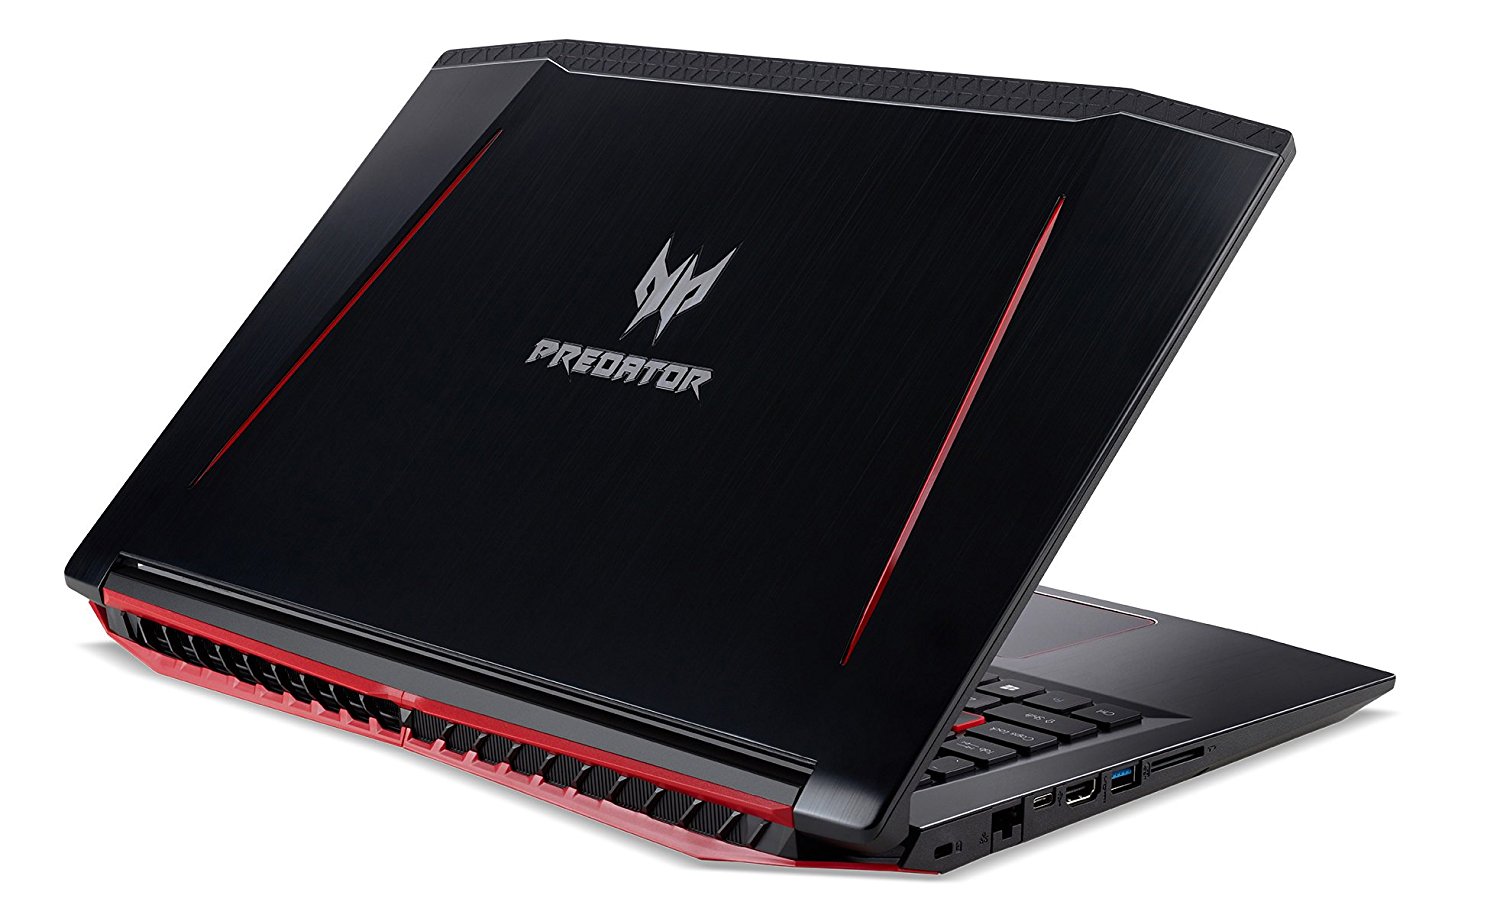  Acer Predator Helios 300 gaming laptop  at its lowest price 